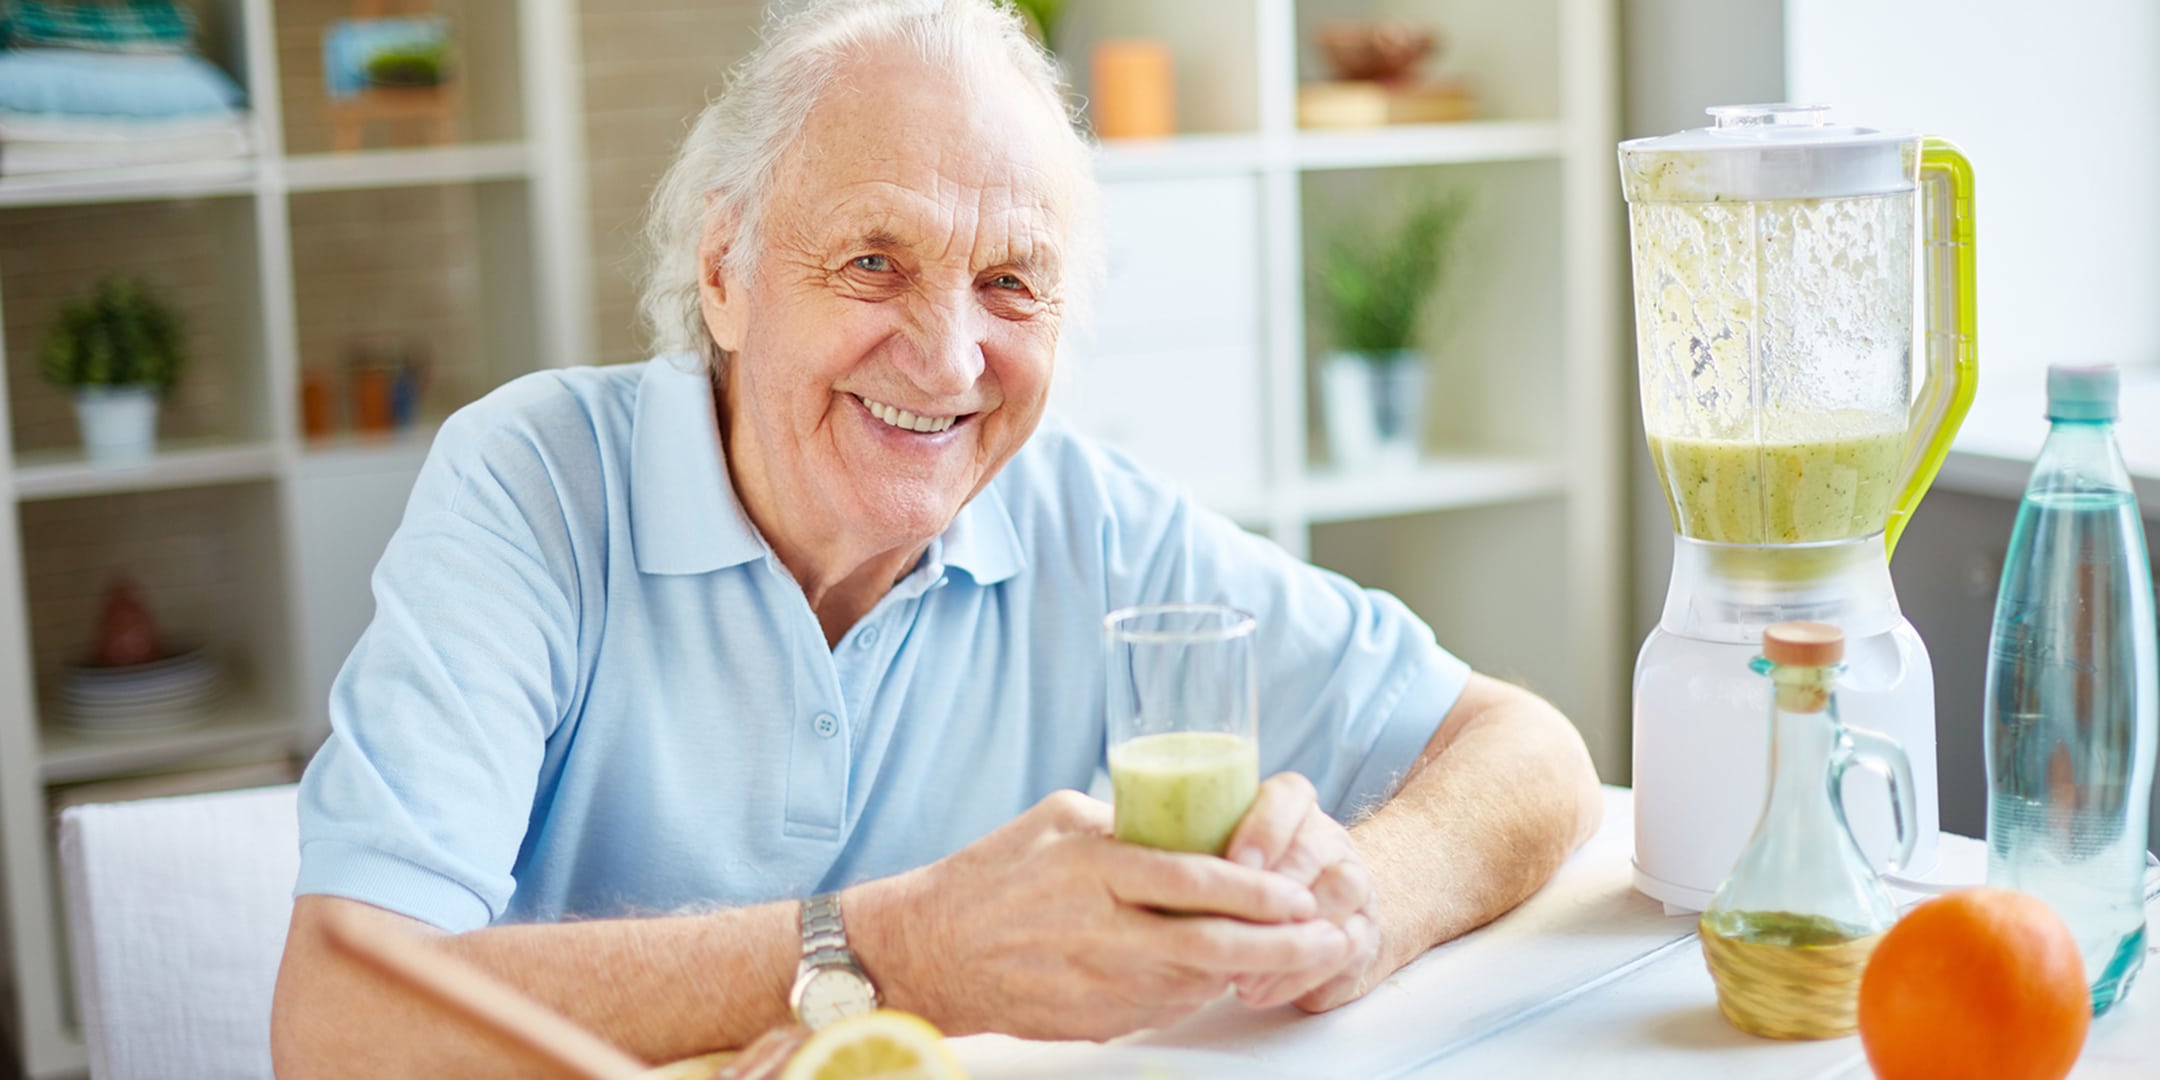 A Guide to Good Nutrition for Seniors